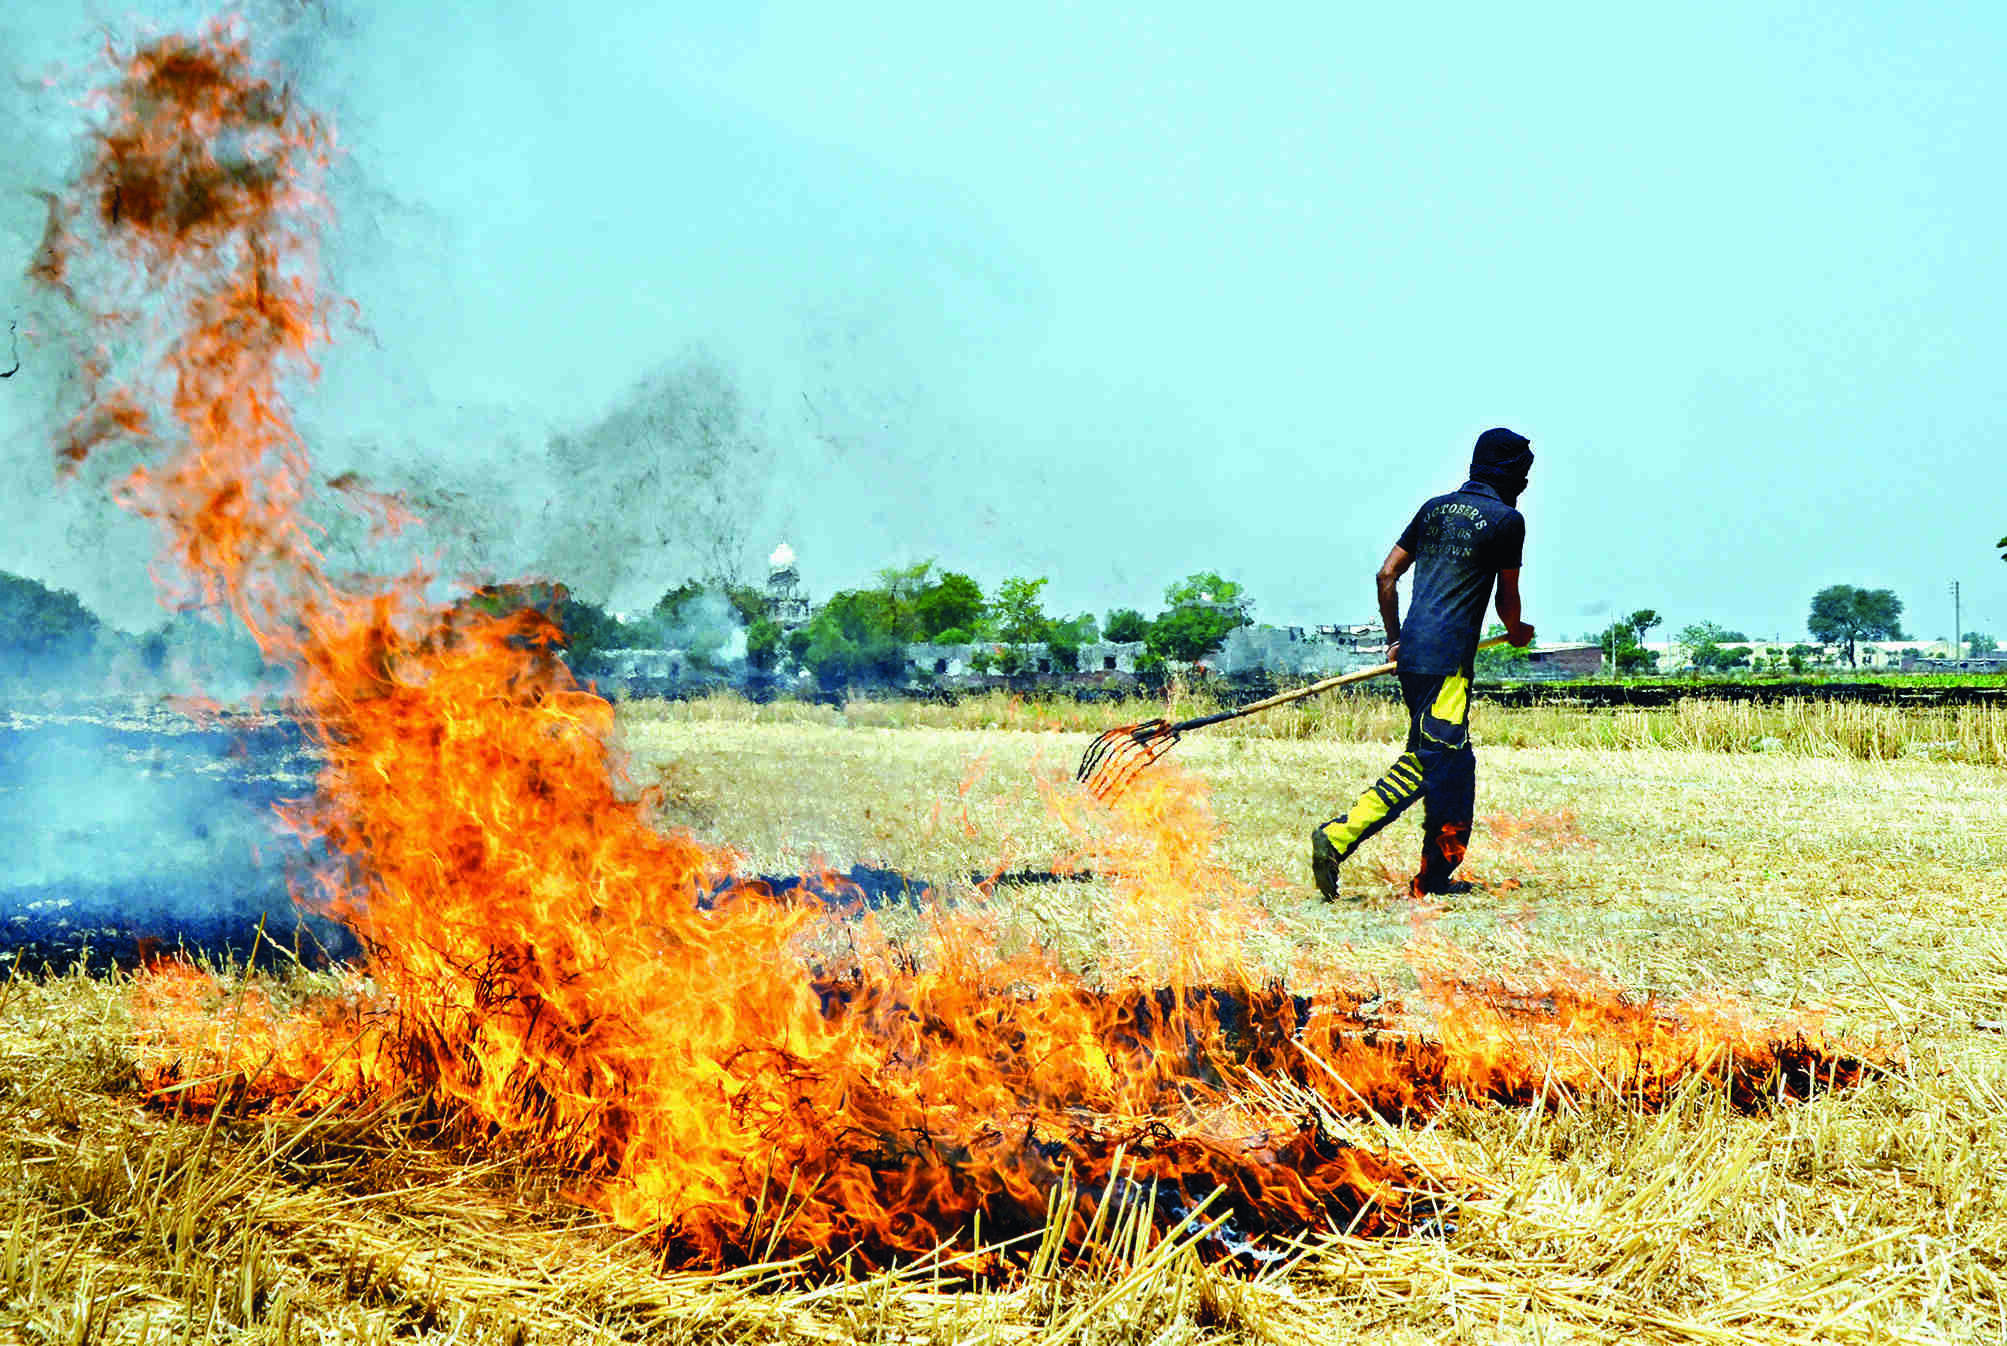 Take steps to avoid loss of life due to heatwave or fire incidents